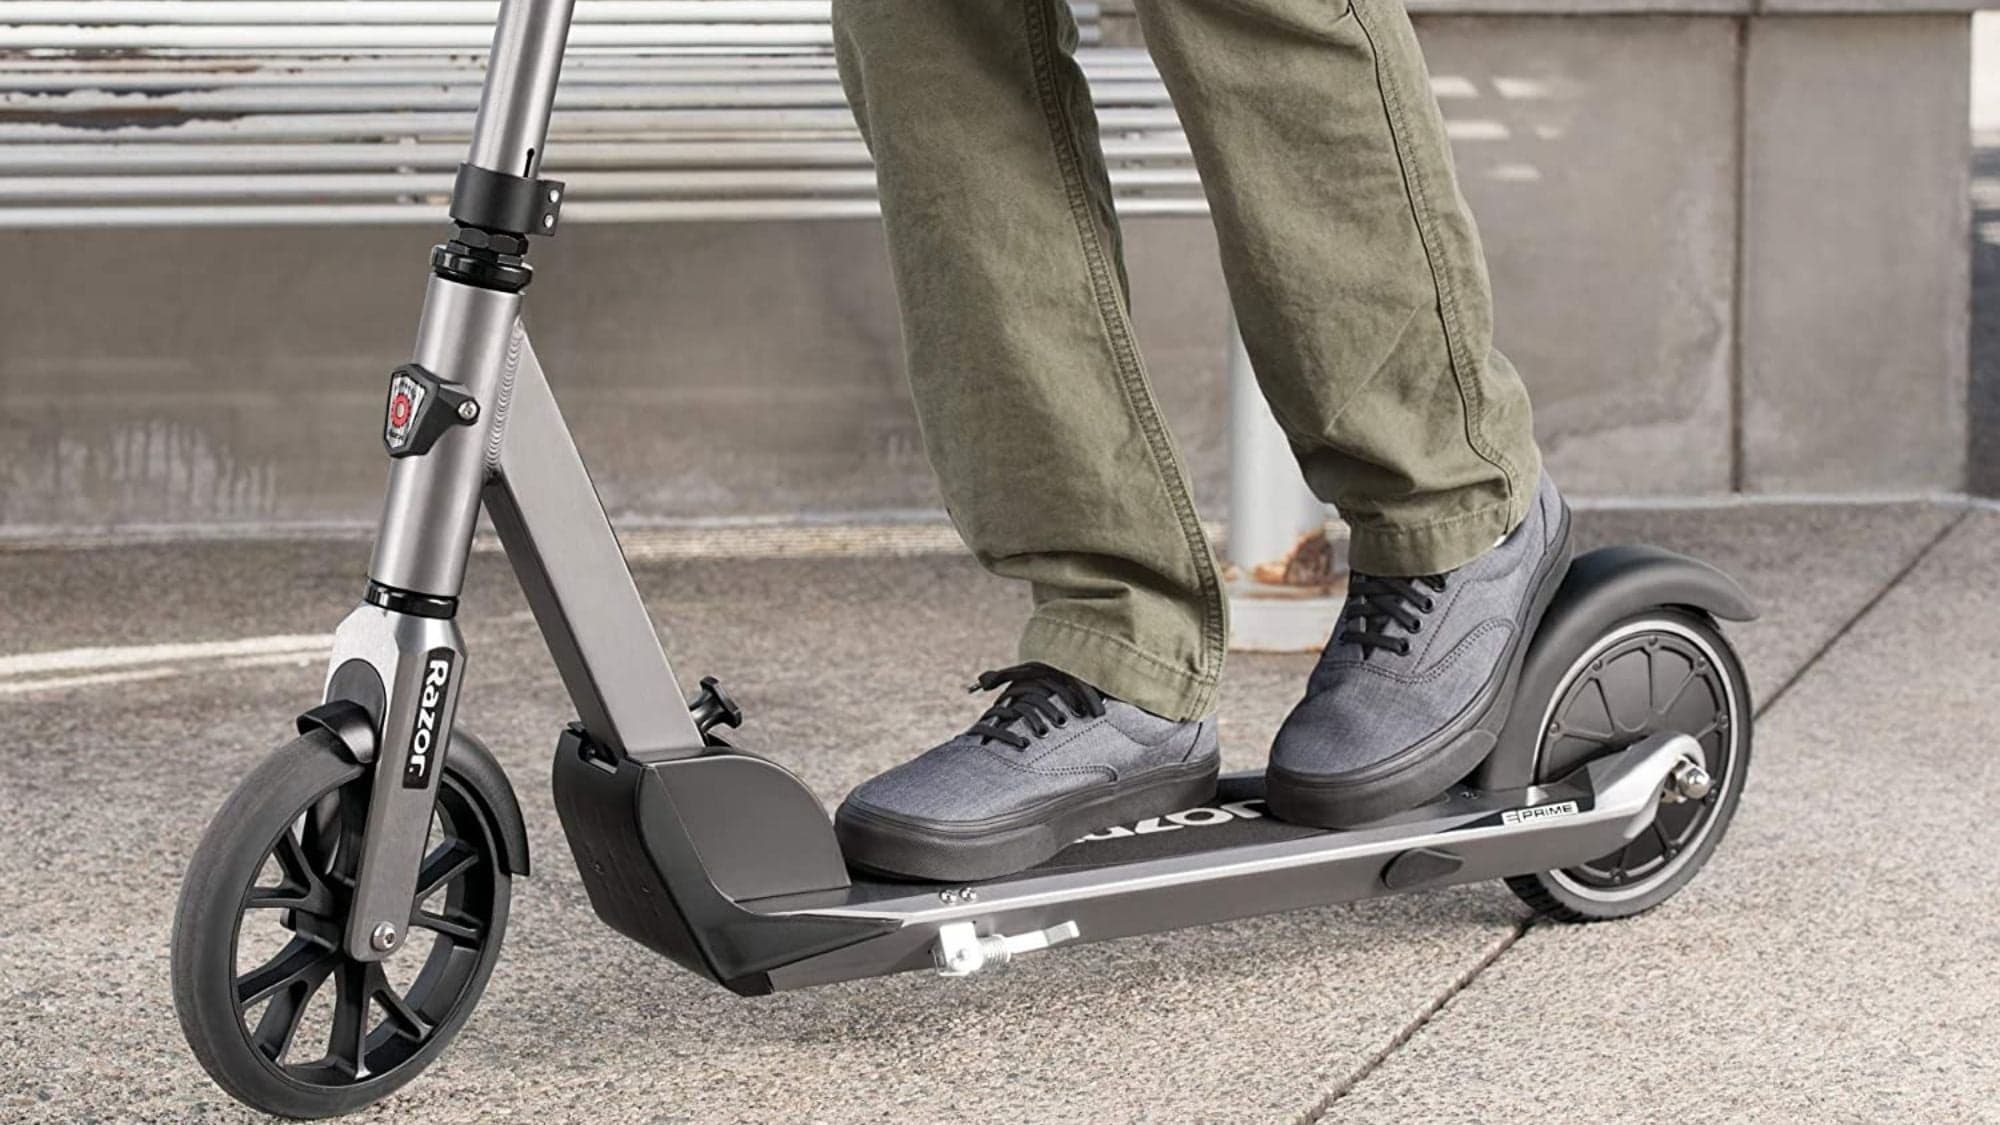 The Best Razor Electric Scooters (Review & Buying Guide) in 2022